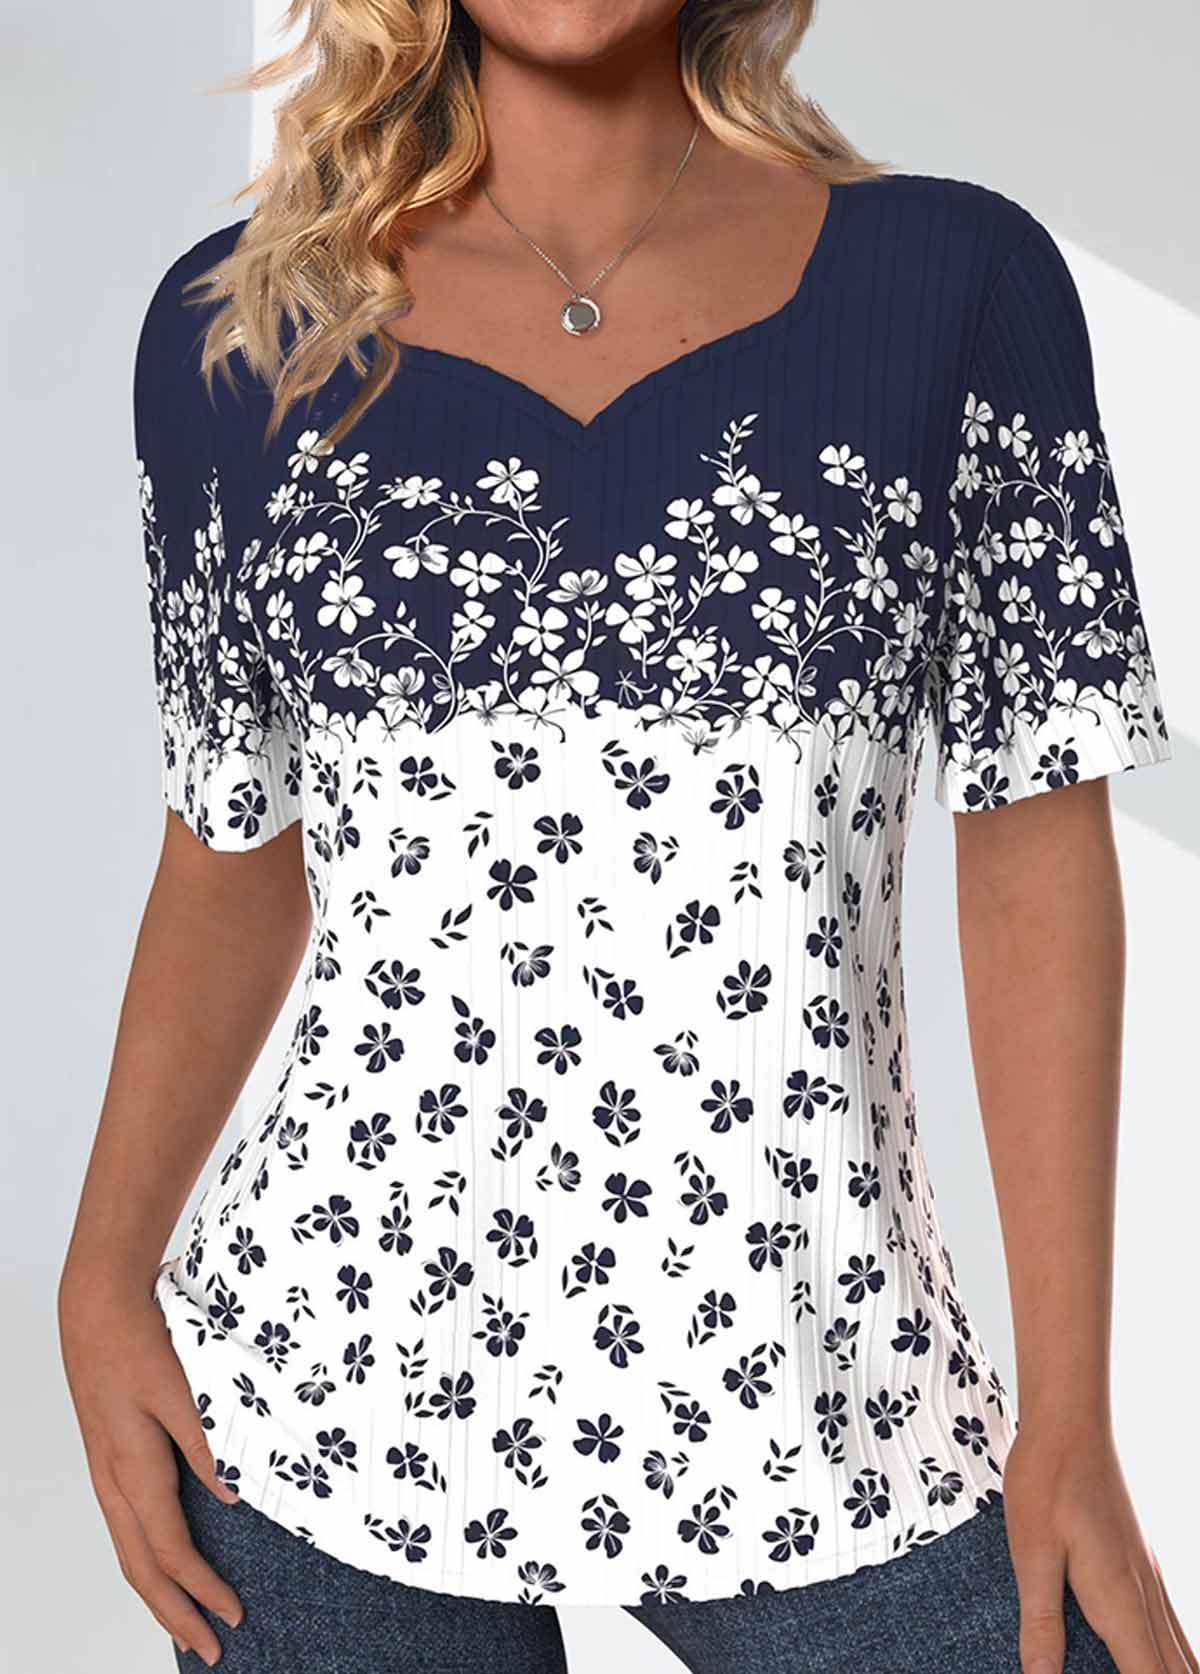 Ditsy Floral Print Textured Fabric Navy T Shirt